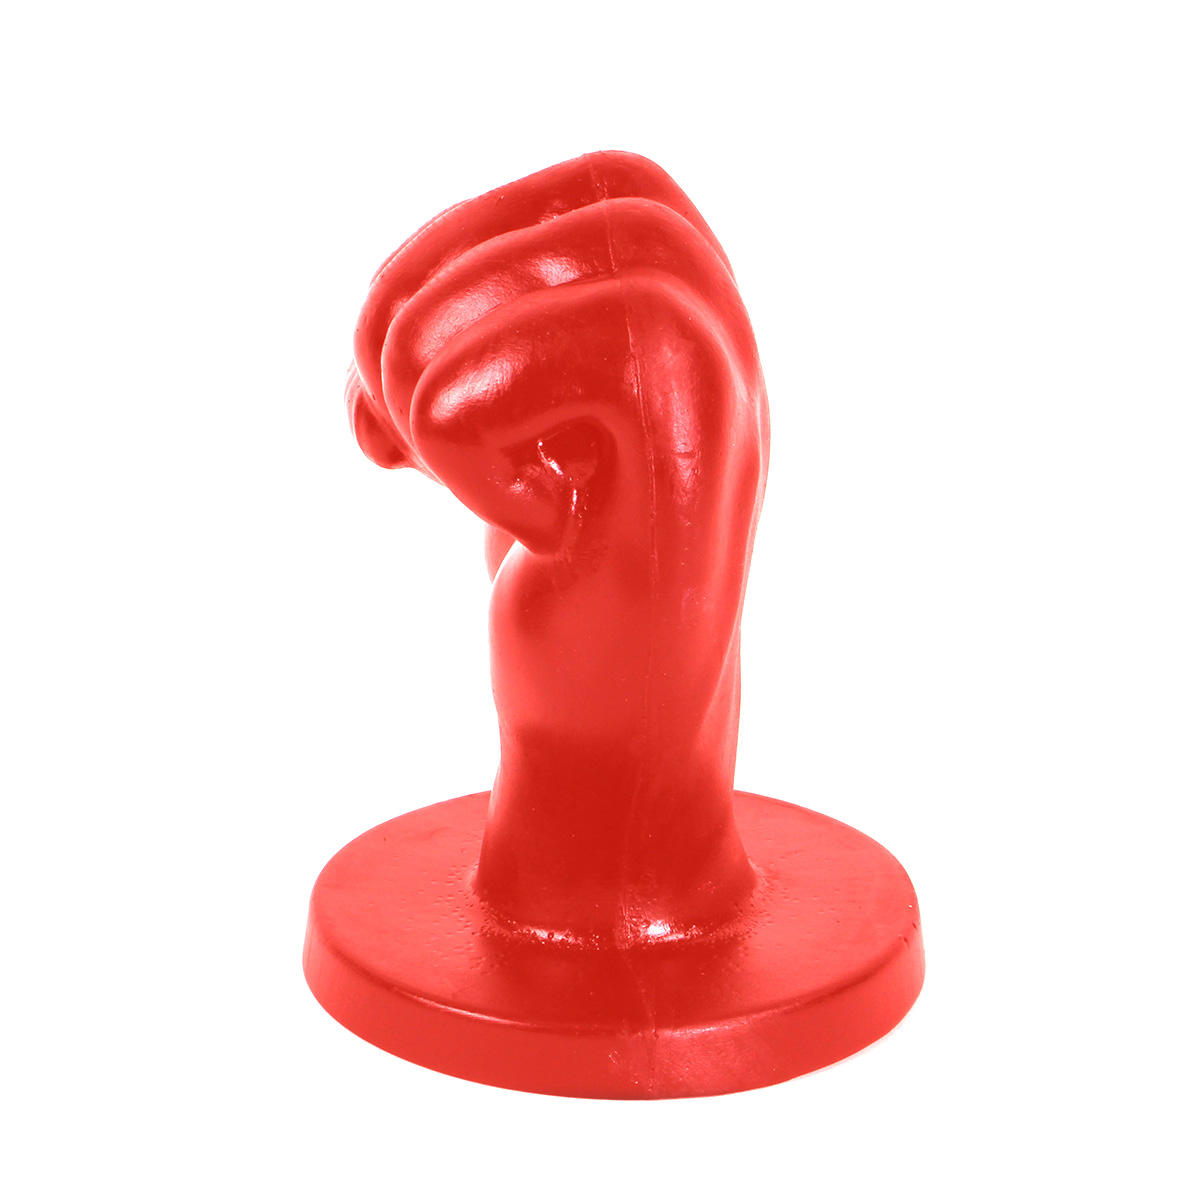 All-Red-Fist-Large-ABR94-115-ABR94-1